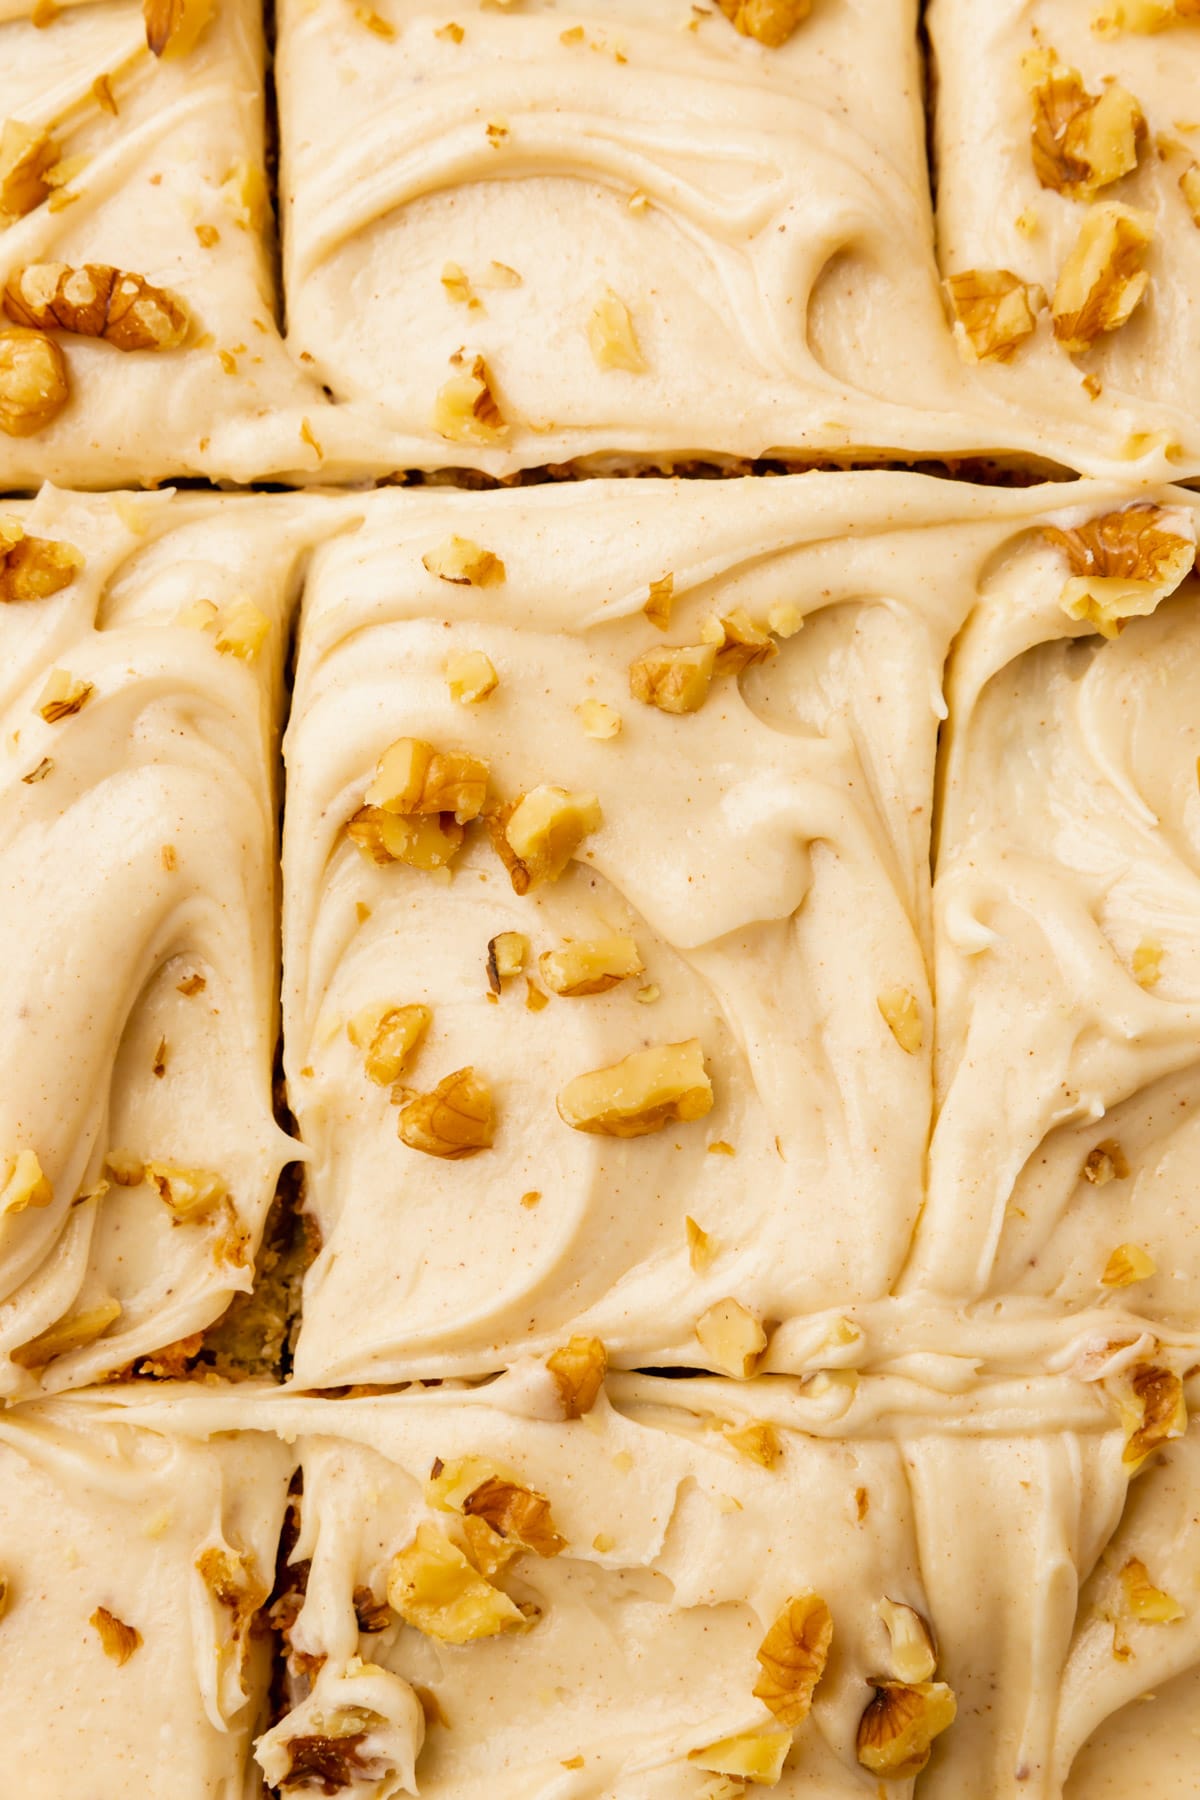 A sheet cake covered with brown butter cream cheese frosting and toasted walnuts that has been sliced into squares.